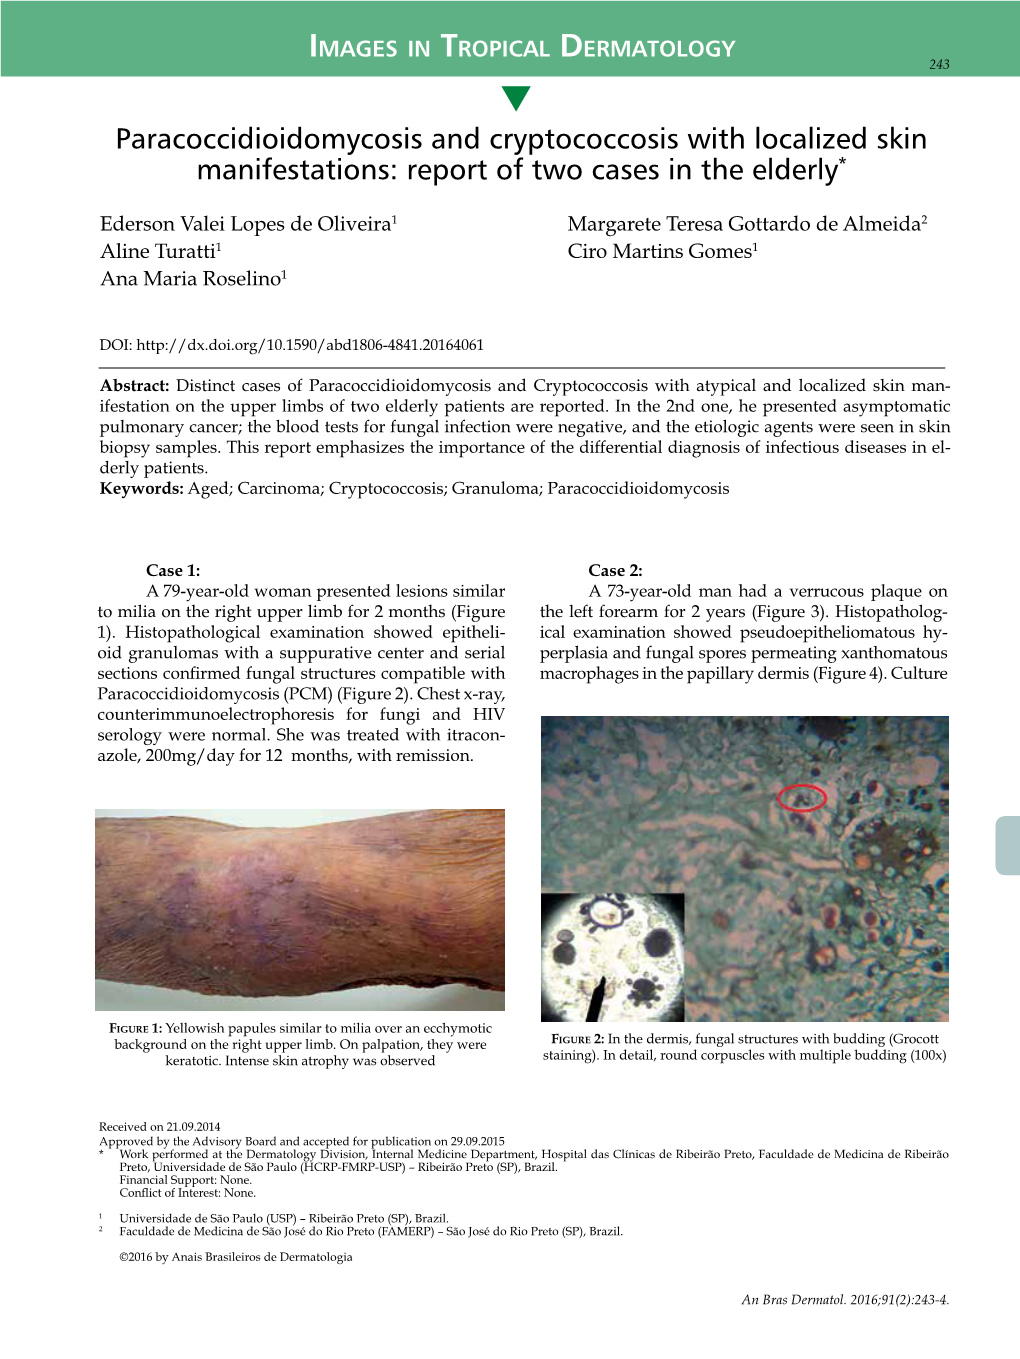 Paracoccidioidomycosis and Cryptococcosis with Localized Skin Manifestations: Report of Two Cases in the Elderly*